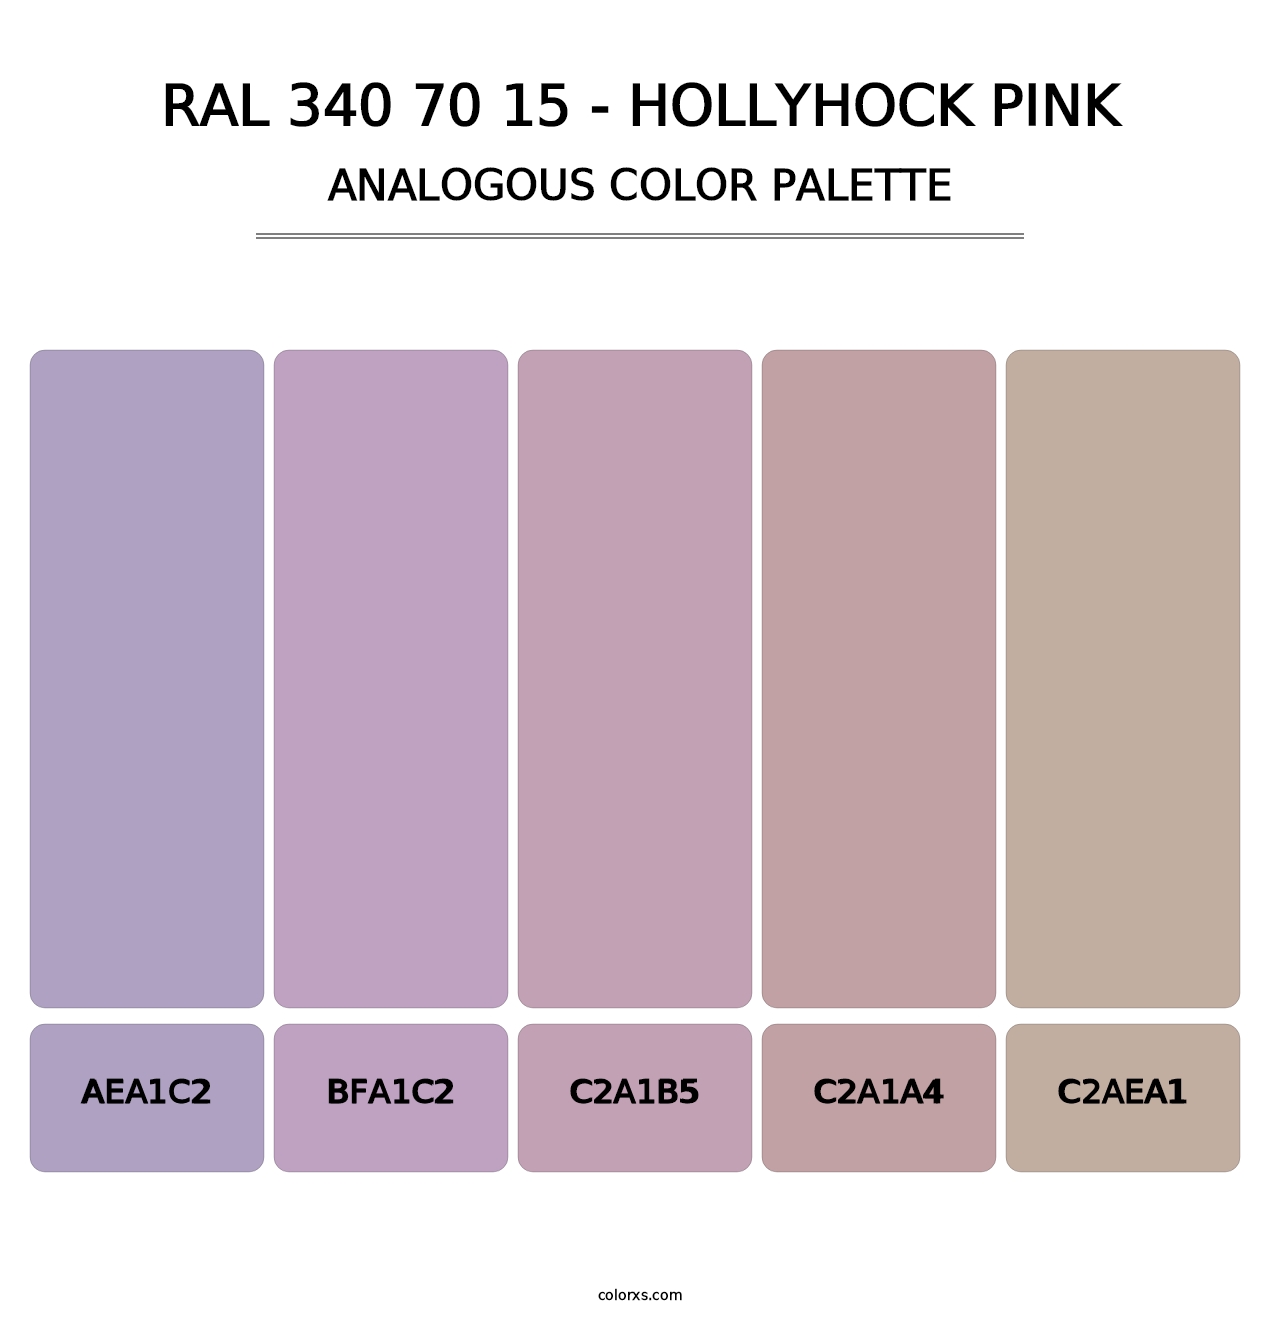 RAL 340 70 15 - Hollyhock Pink - Analogous Color Palette